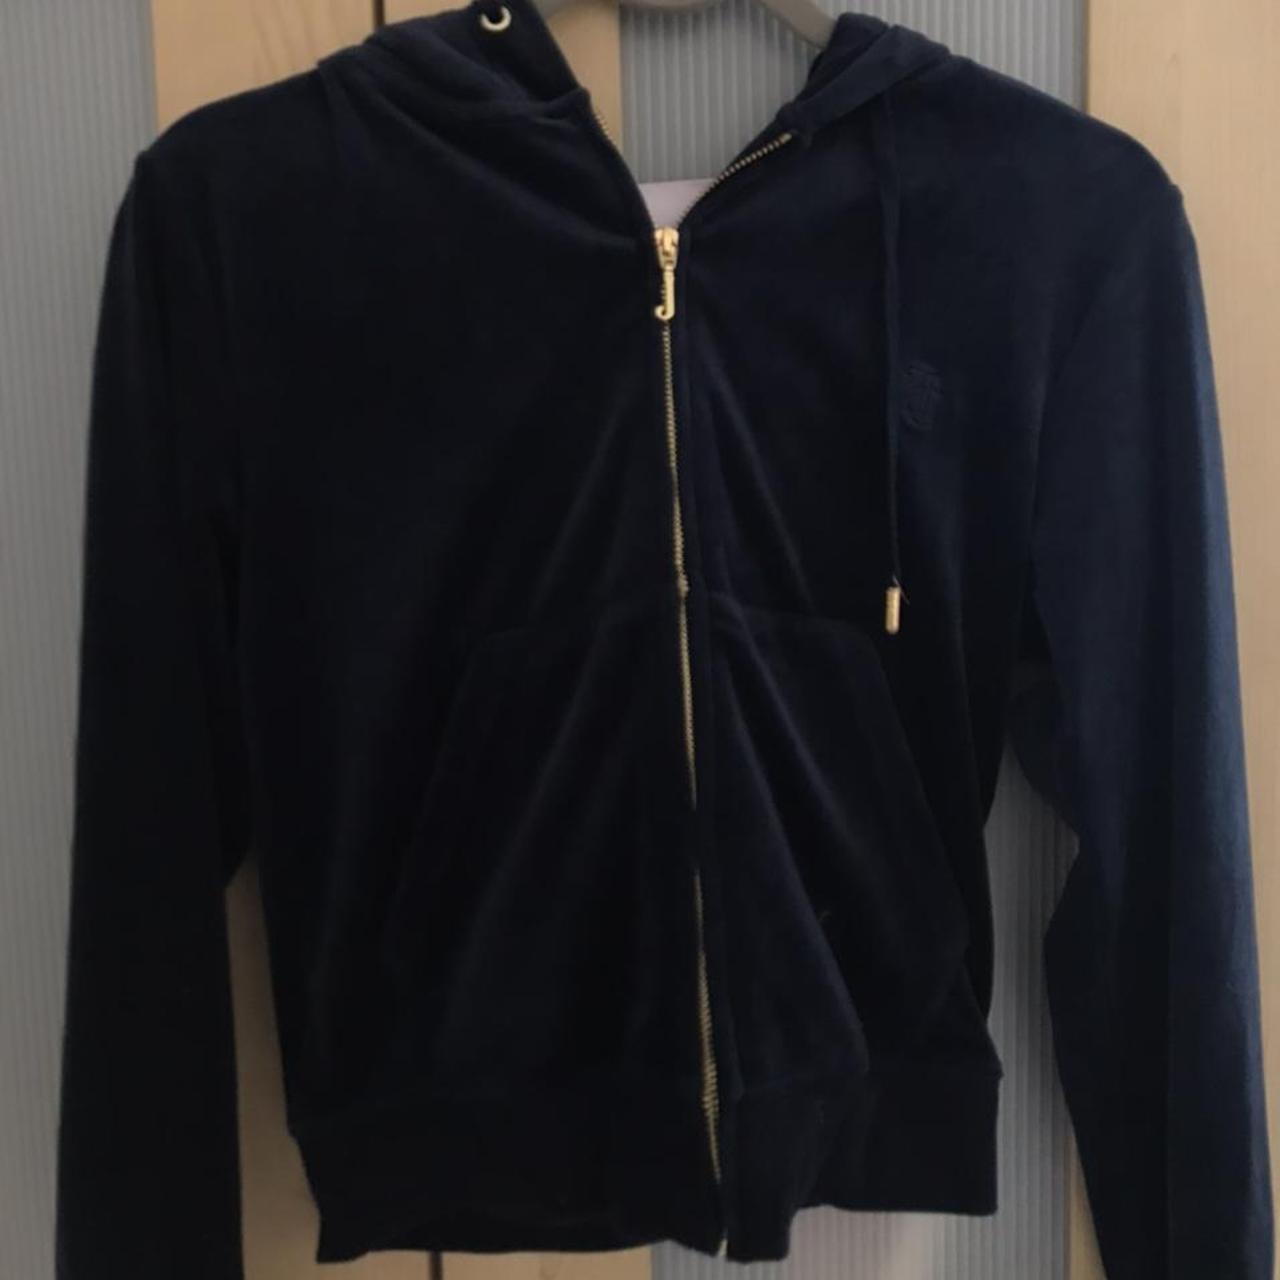 Navy Juicy couture hoodie with gold detailing - Depop